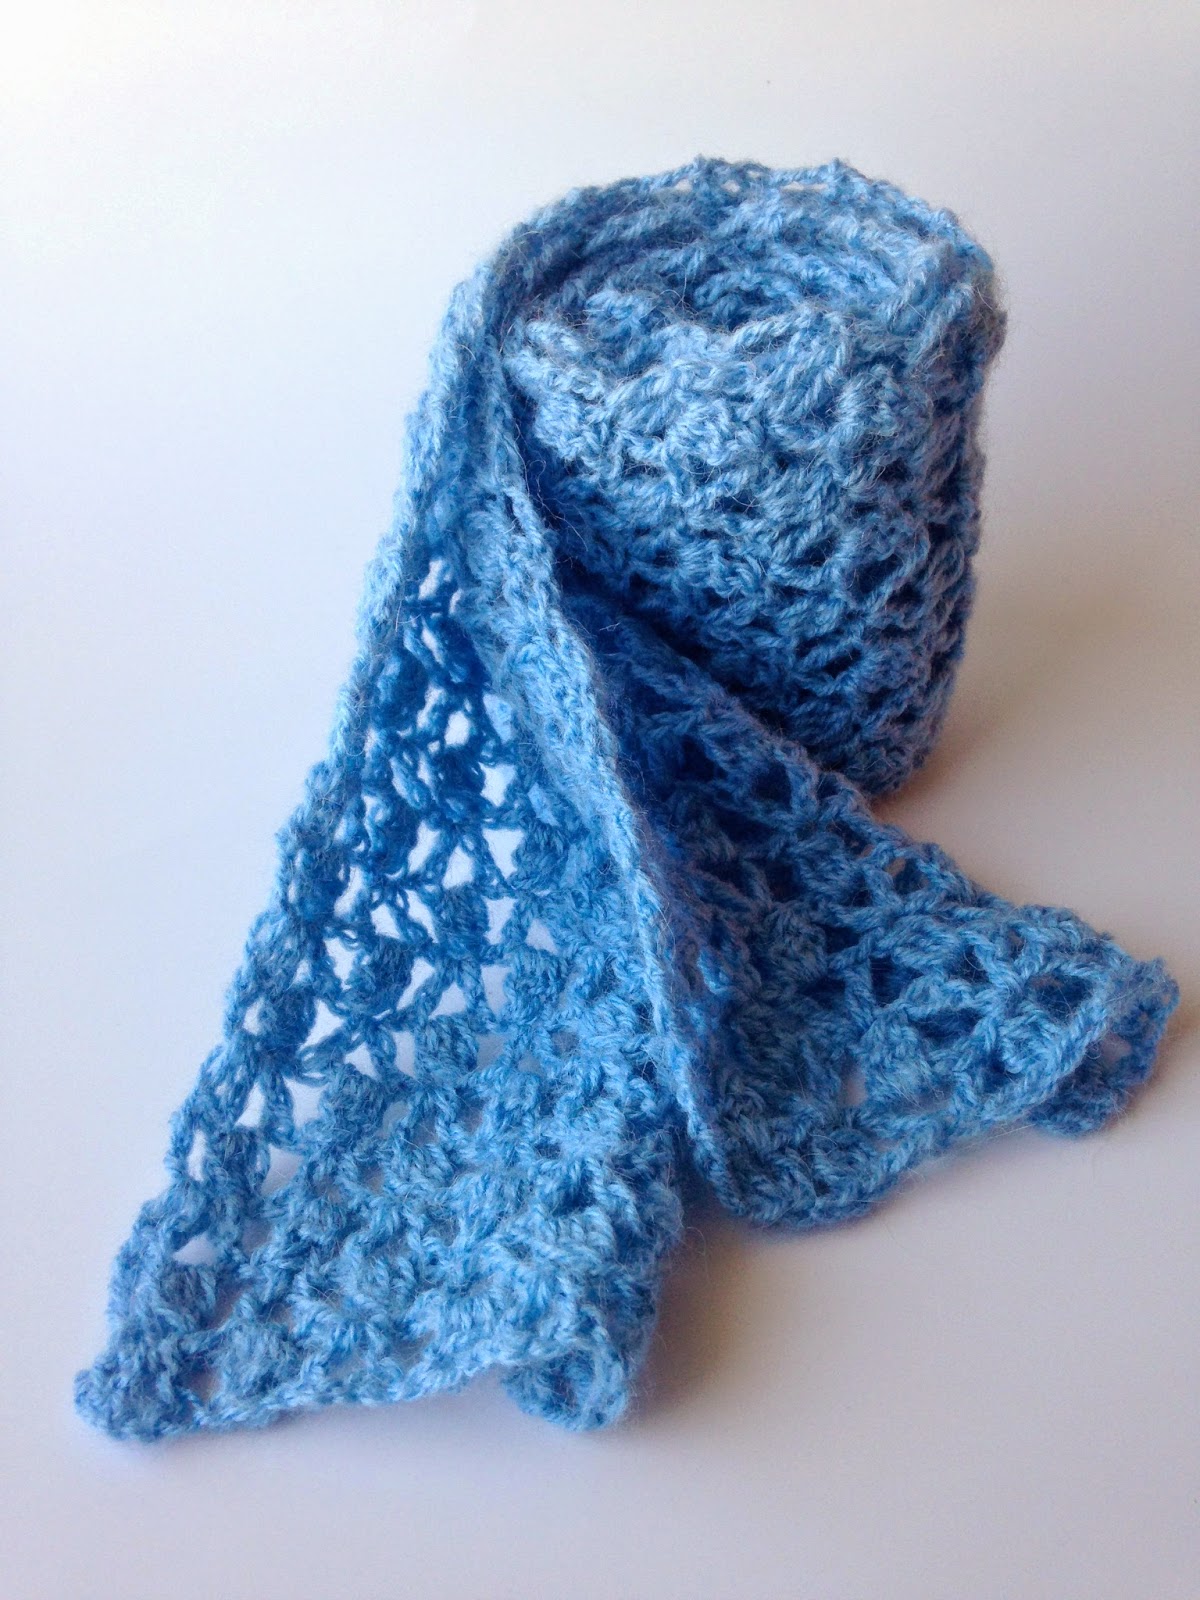 5 Little Monsters: Lace Cluster Scarf: A Free Crochet Pattern